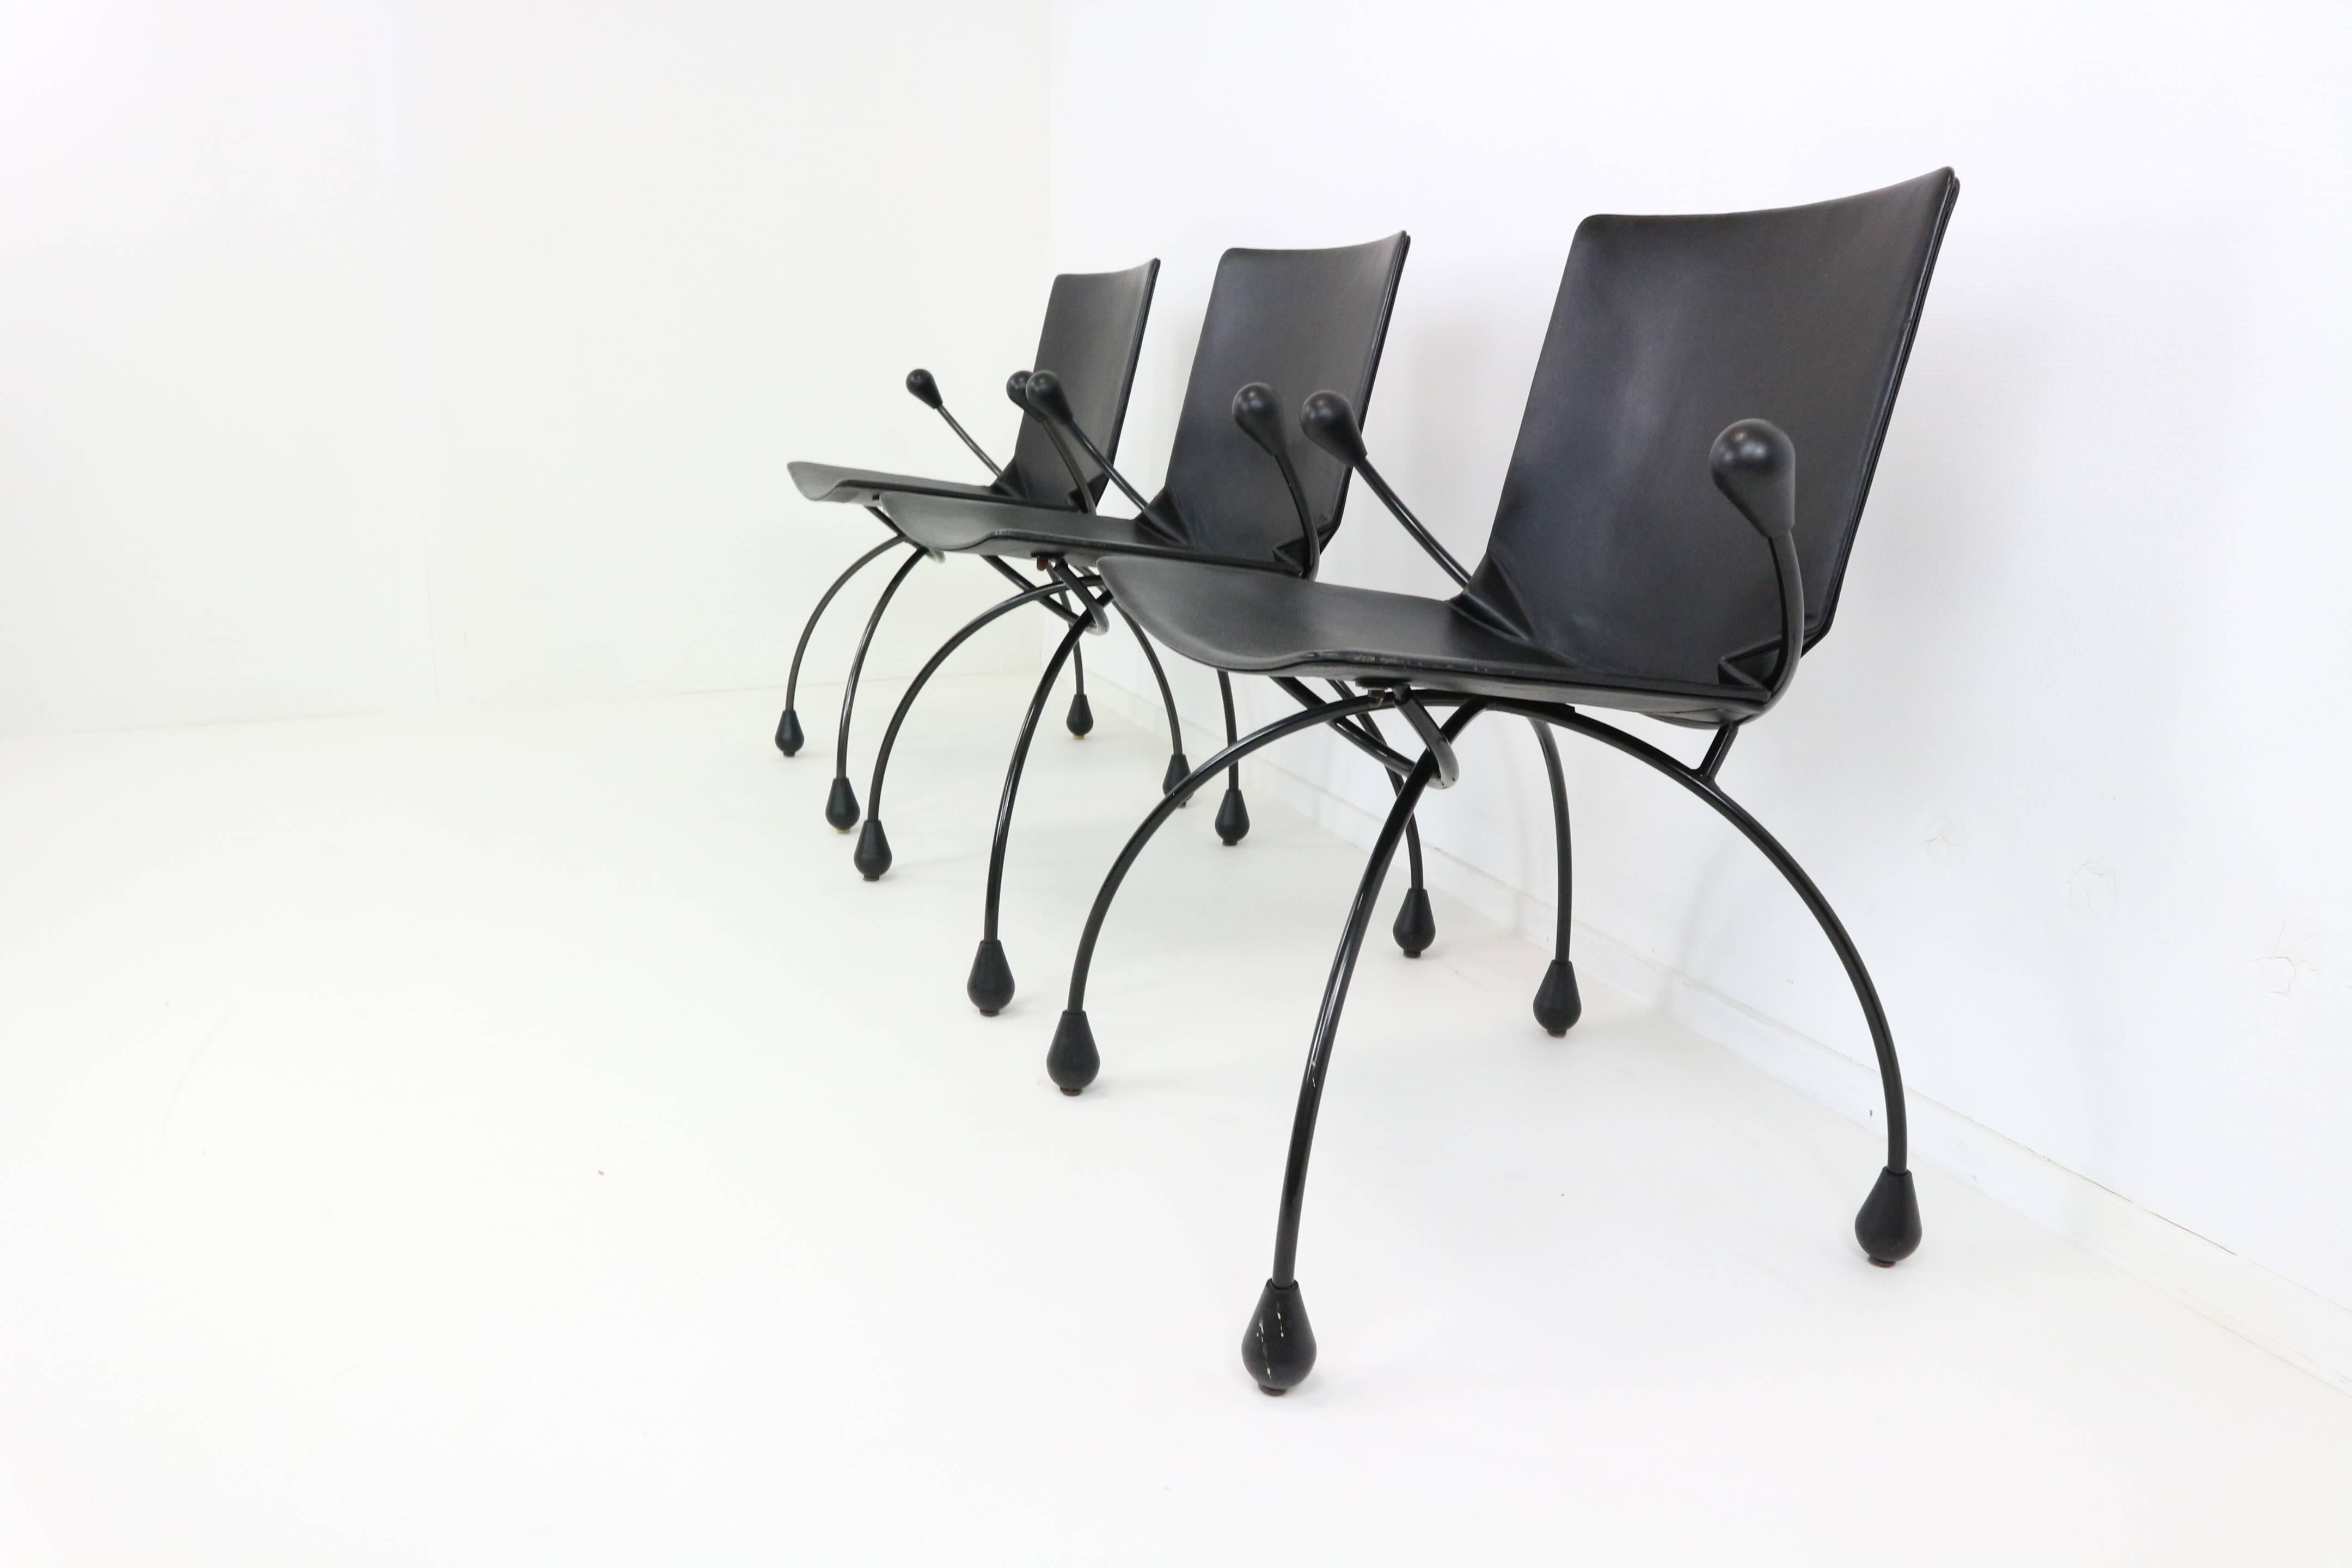 These 1980s funky dining chairs are made of real black leather on a metal base. Designed by Pierre Mazairac & Karel Boonzaaijer for Young International

We ship worldwide, do not hesitate to contact us. We inform you about the best price available,